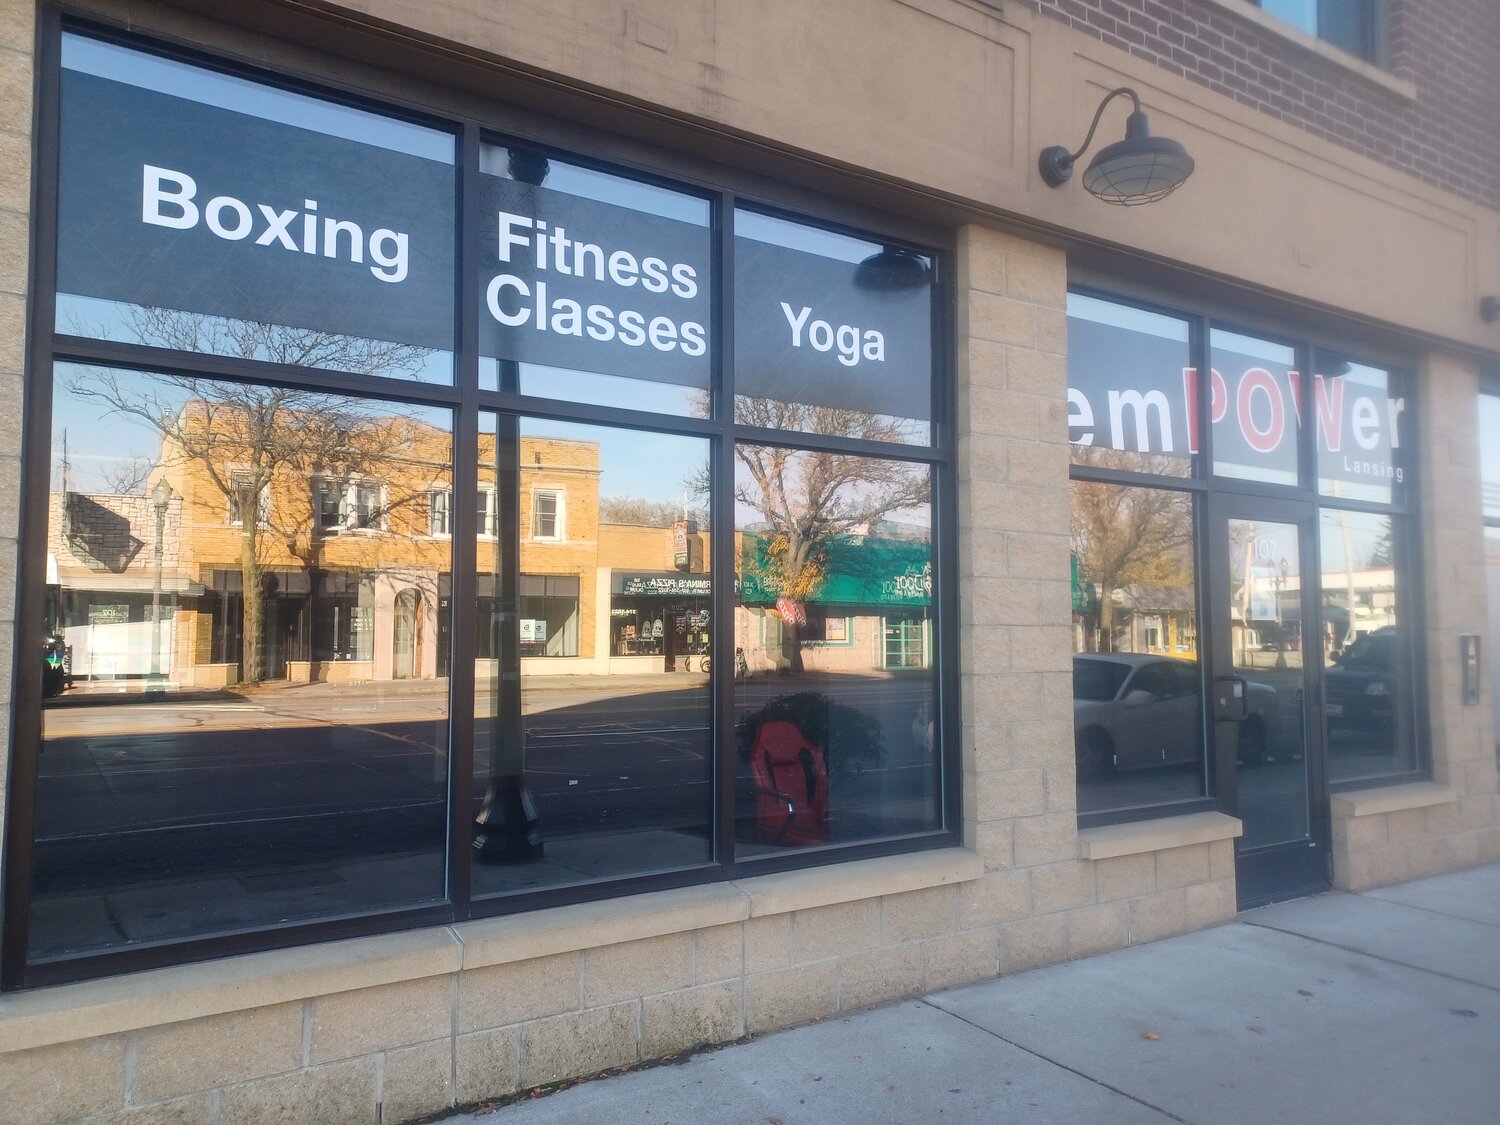 EmPOWer Lansing, 2010 E Michigan Ave, opened up on June 18, 2018. Last Saturday, it closed its doors for good.